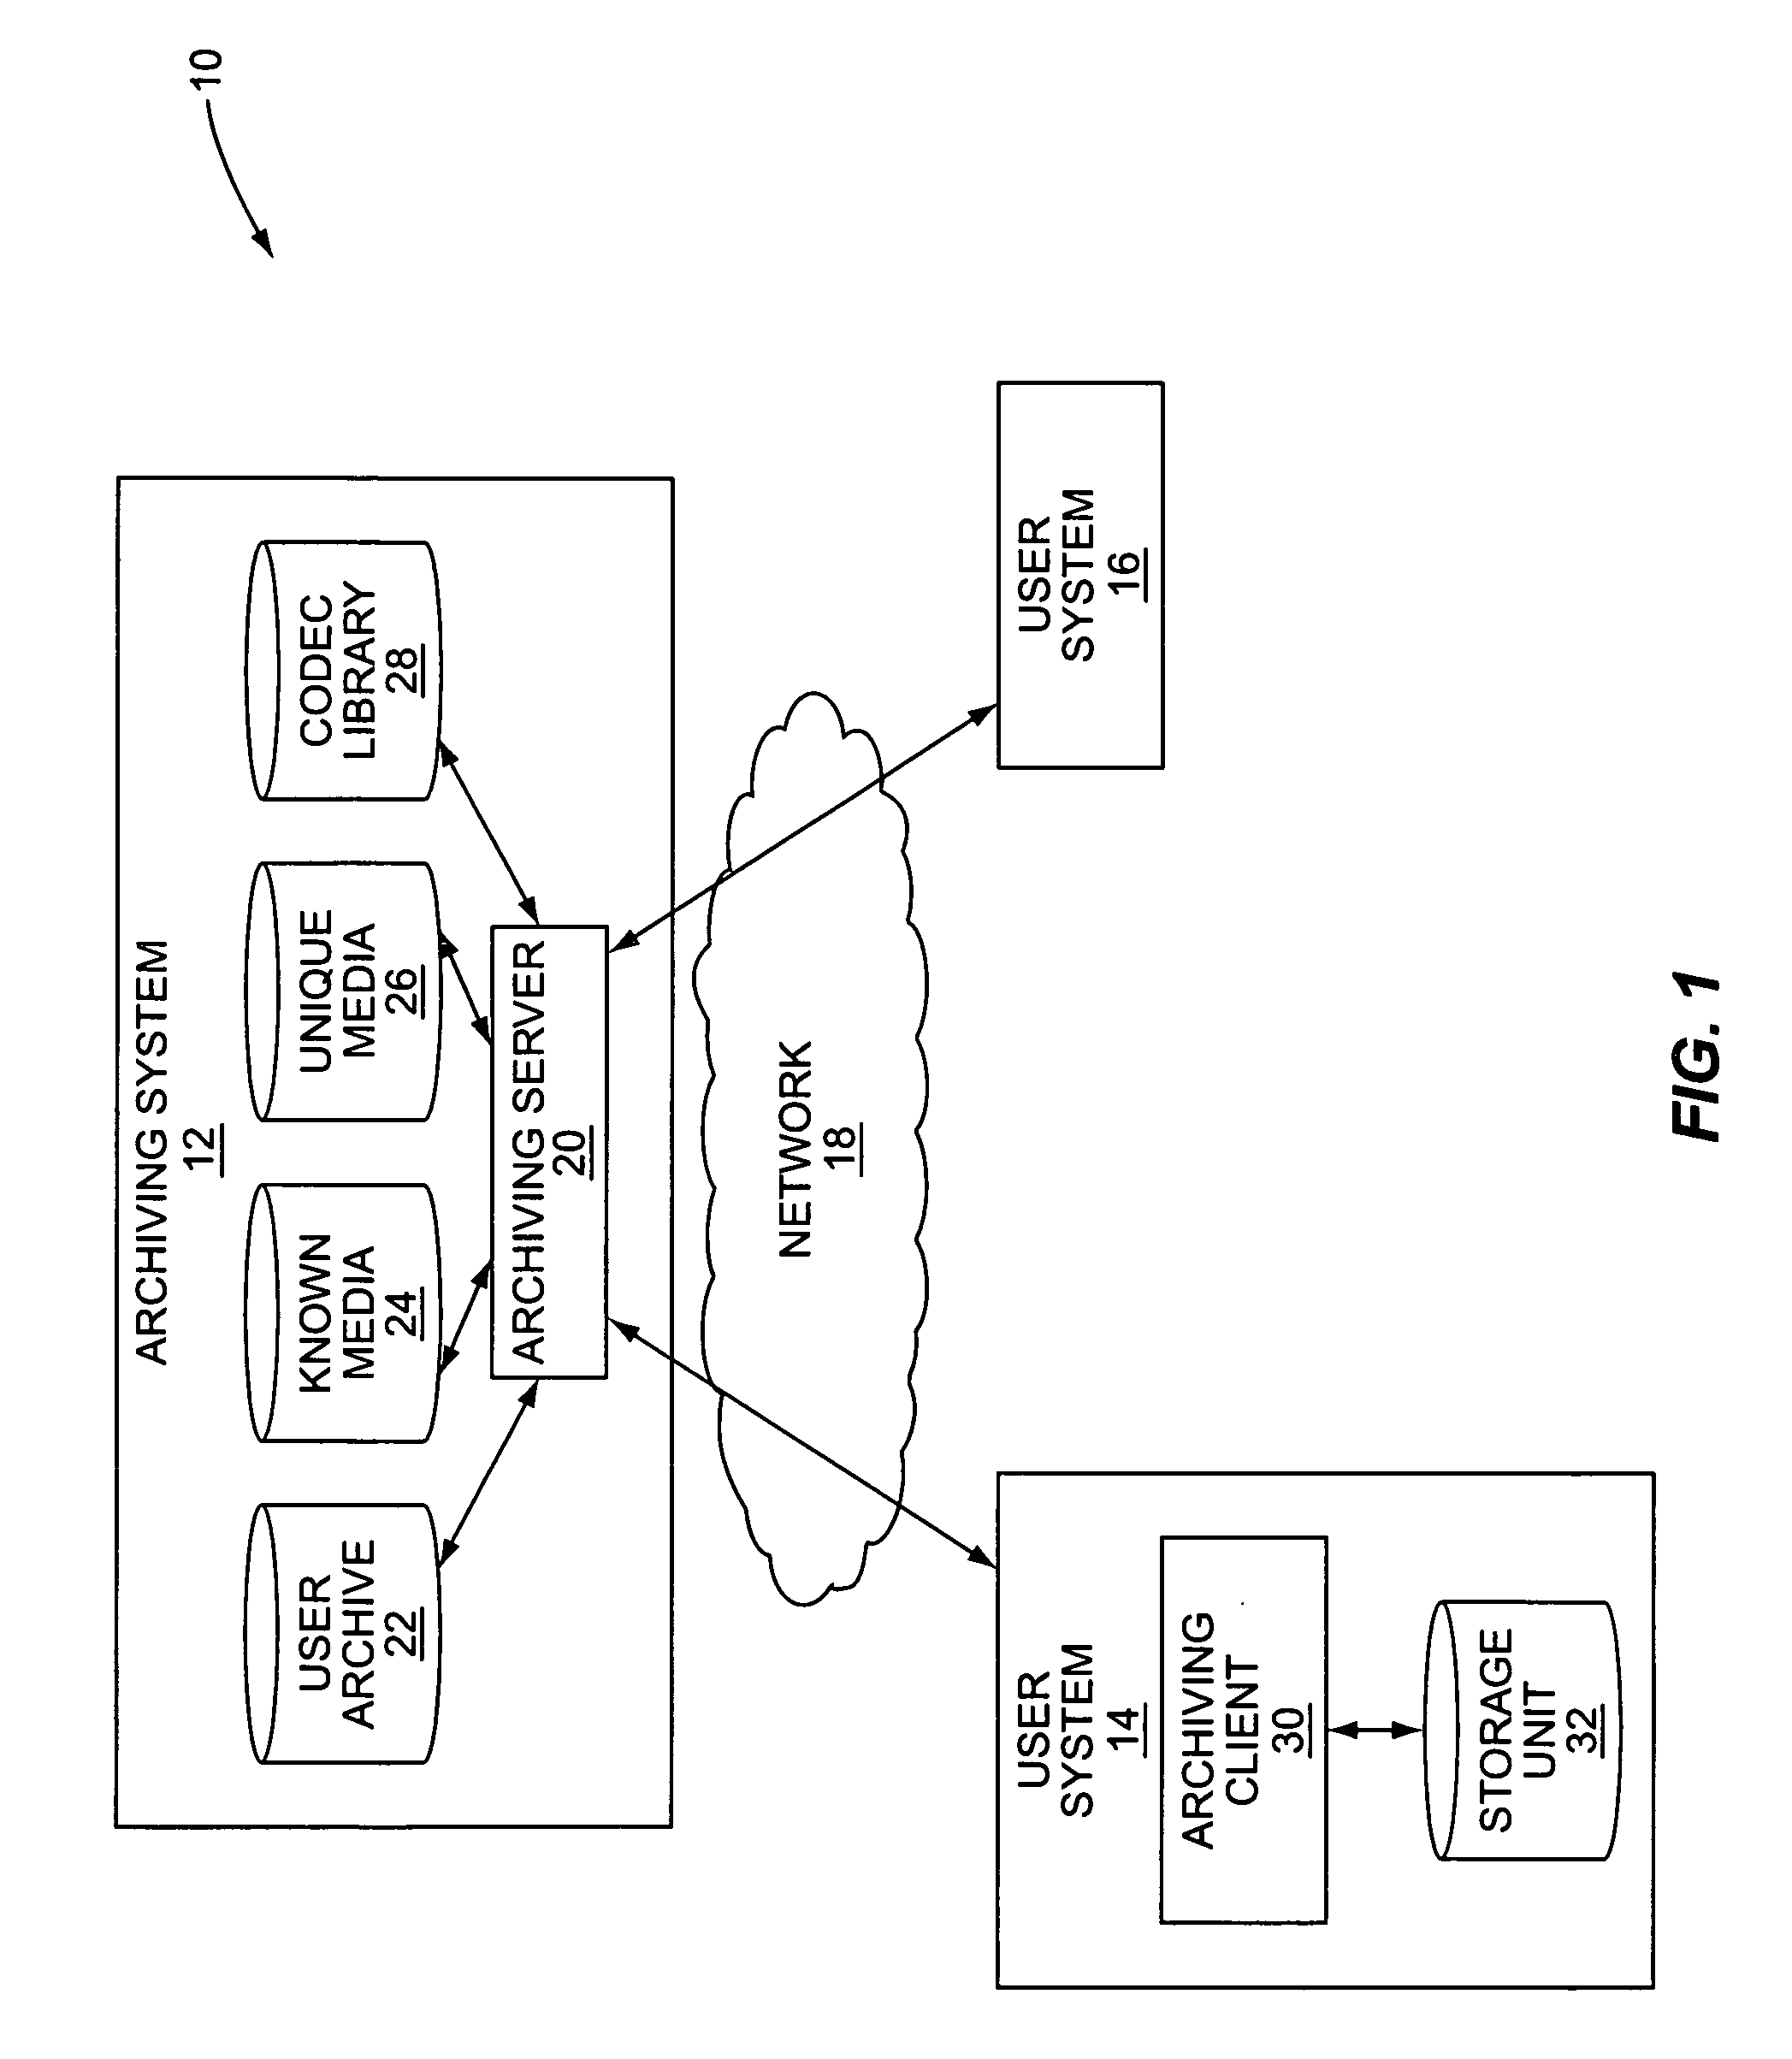 System and method for archiving a media collection